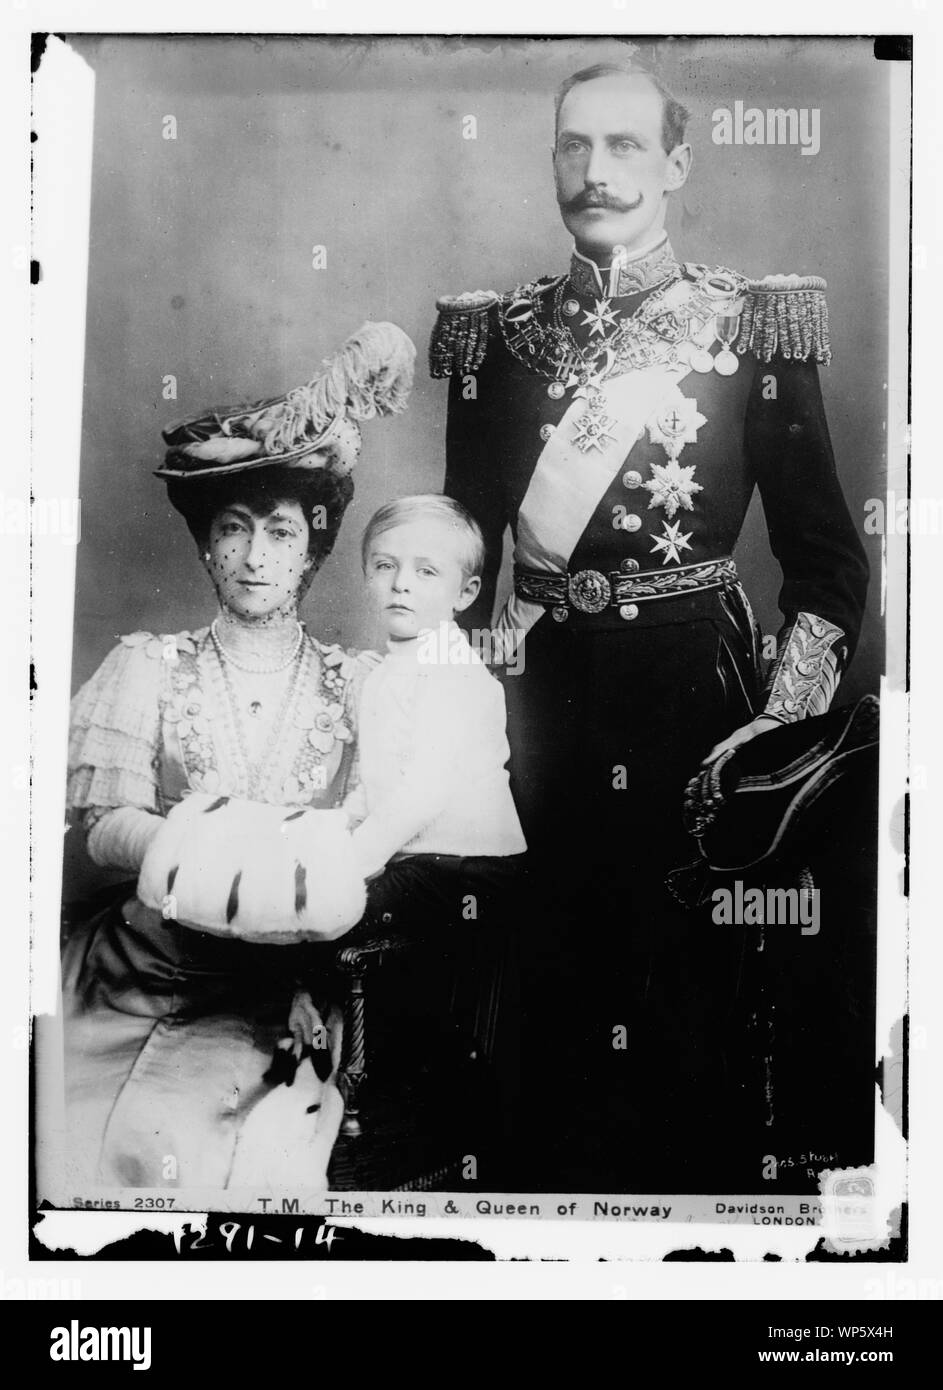 King and Queen of Norway, by Davidson Bros., London / Davidson Bros. Stock Photo